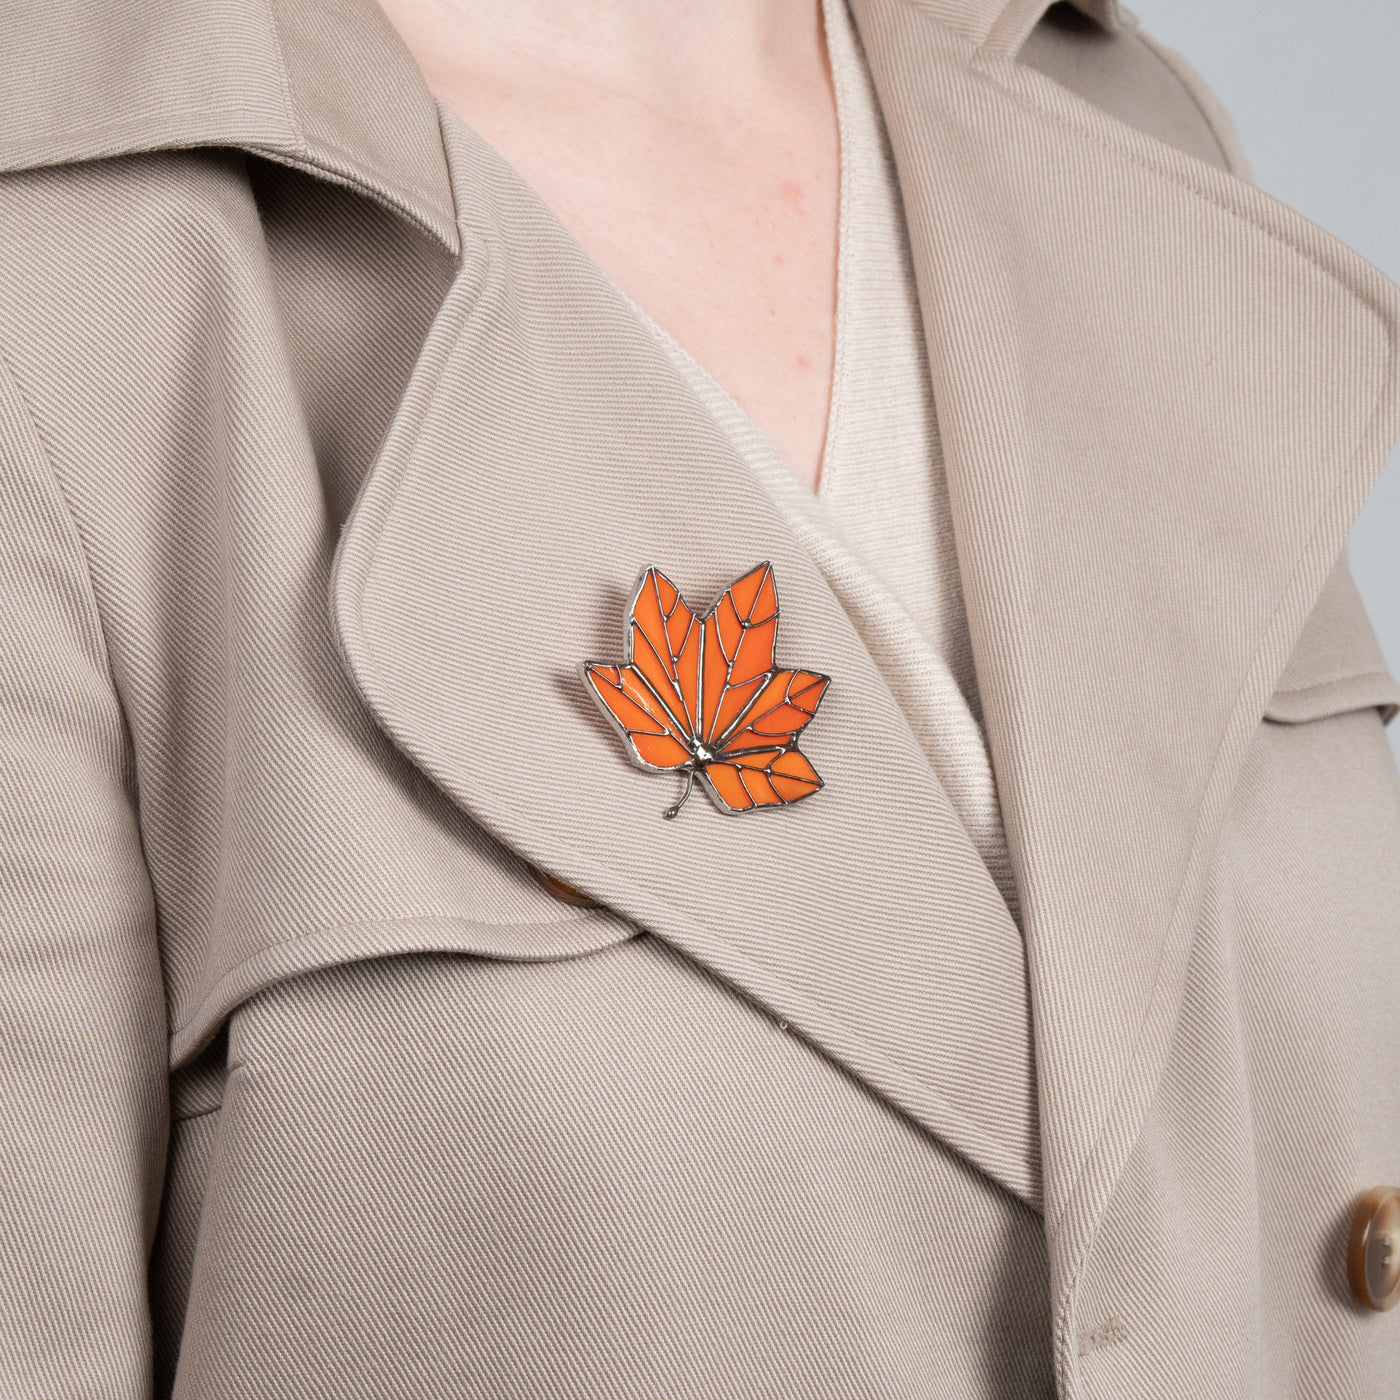 Orange maple leaf brooch of stained glass 